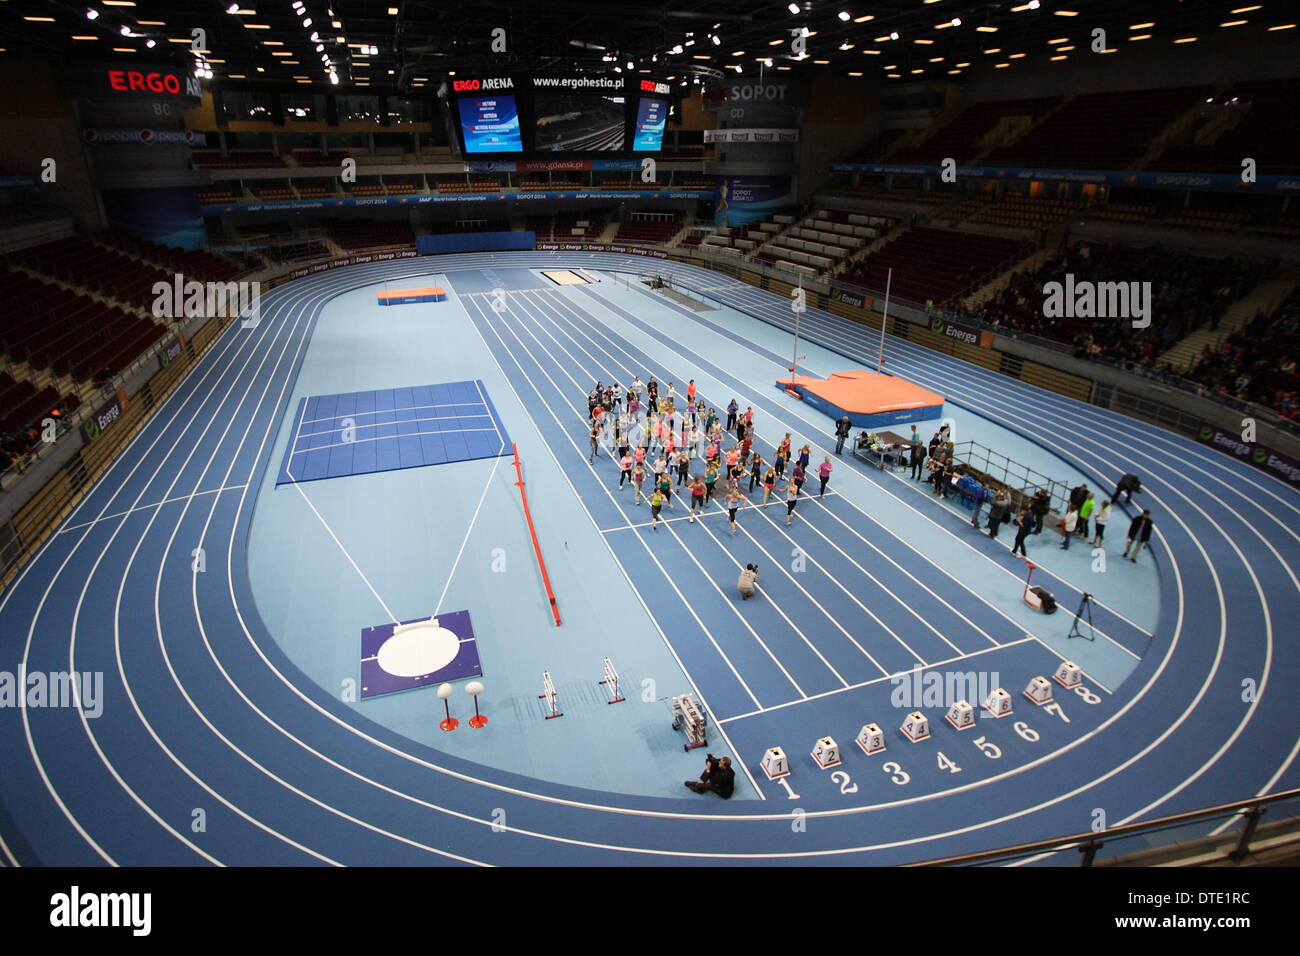 Sopot, Poland 16th, February 2014 New athletics track at the ERGO Arena sports hall is ready for the IAAF World indoor Championships Sopot 2014. Championships starts on 7th of March 2014. Stock Photo